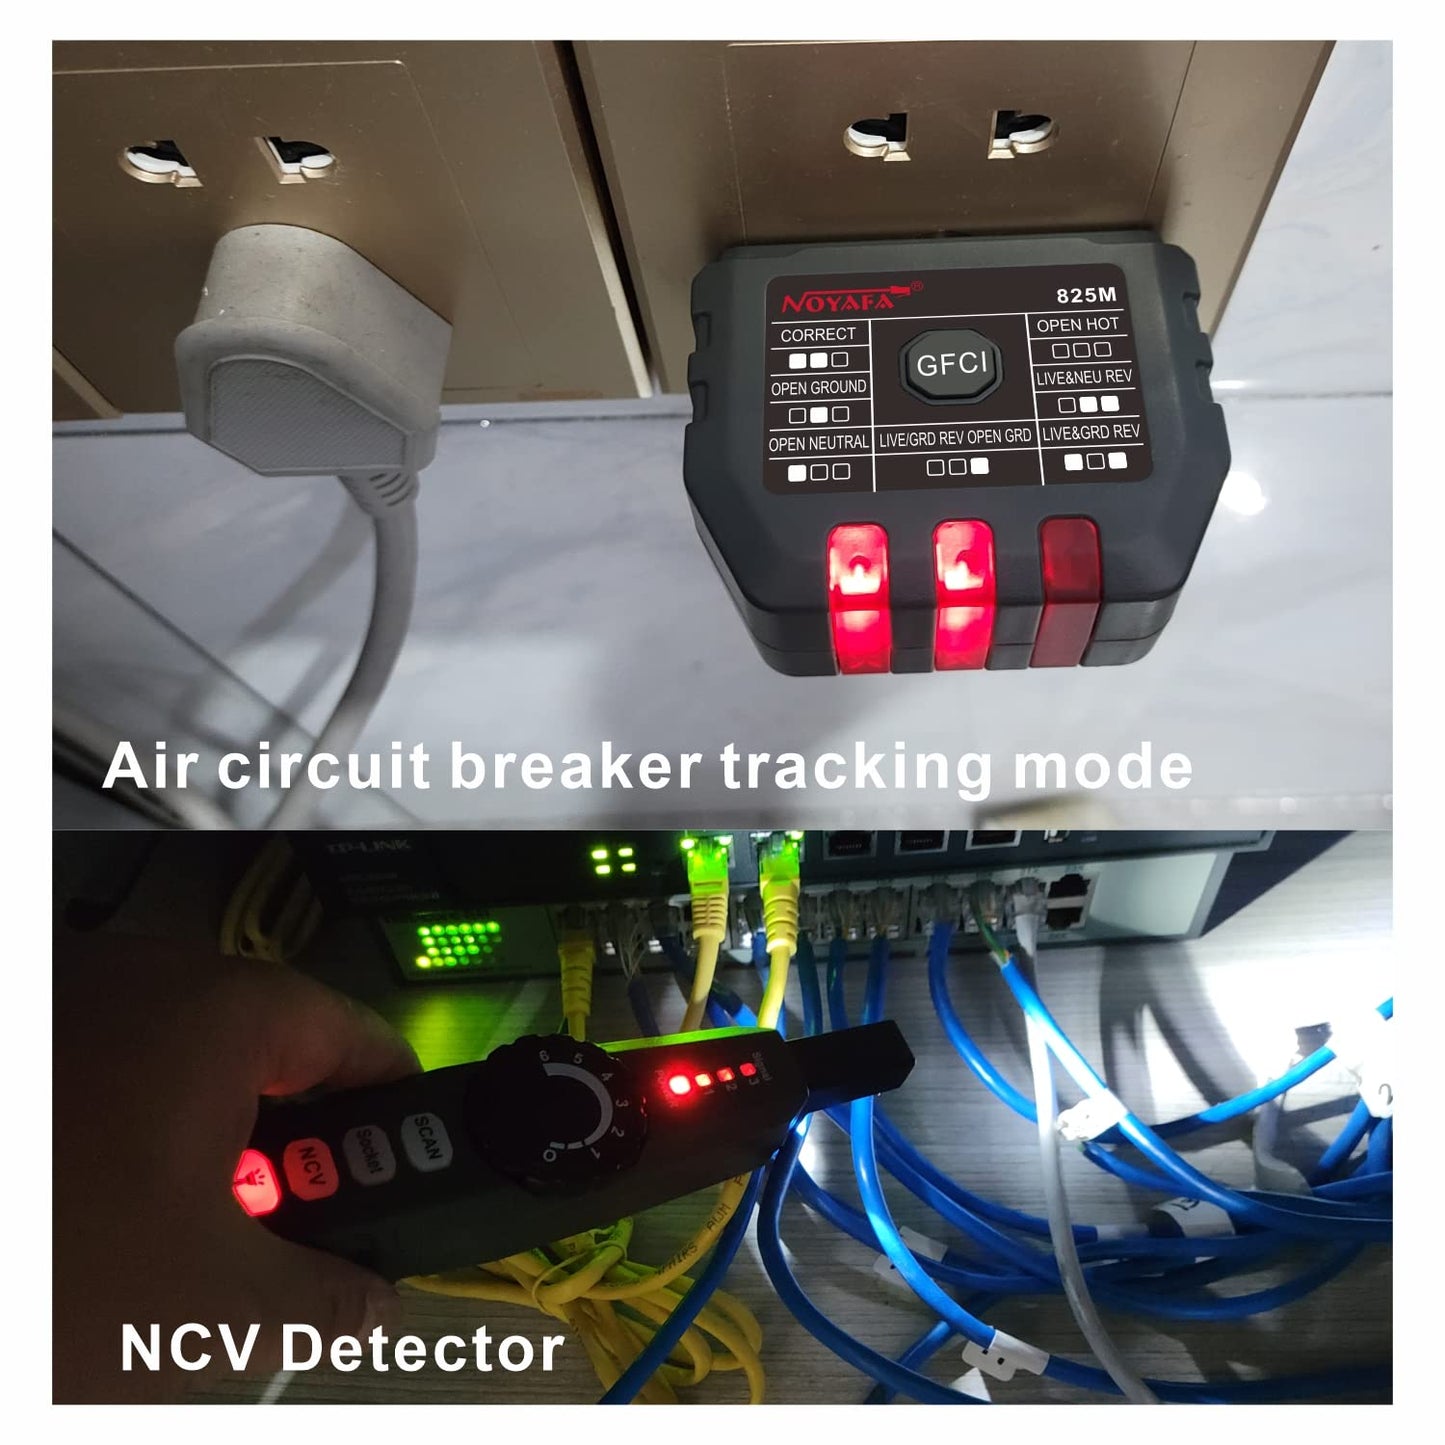 [NEW UPGRADE]  Noyafa NF-825TMR Advanced Circuit Tracer with Integral GFCI Outlet Tester, Circuit Breaker Finding, Network Cable Tracking, NCV Detection